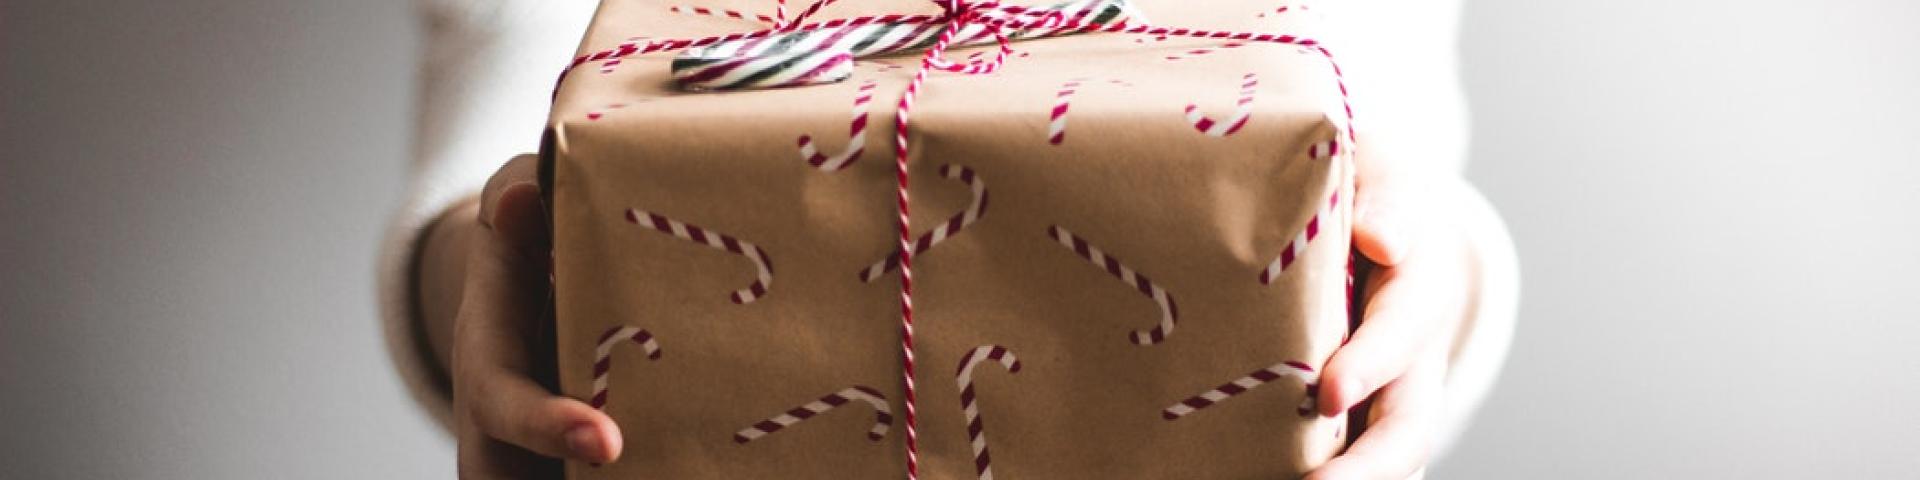 A teenage girl holding out a gift with candy cane wrapping paper